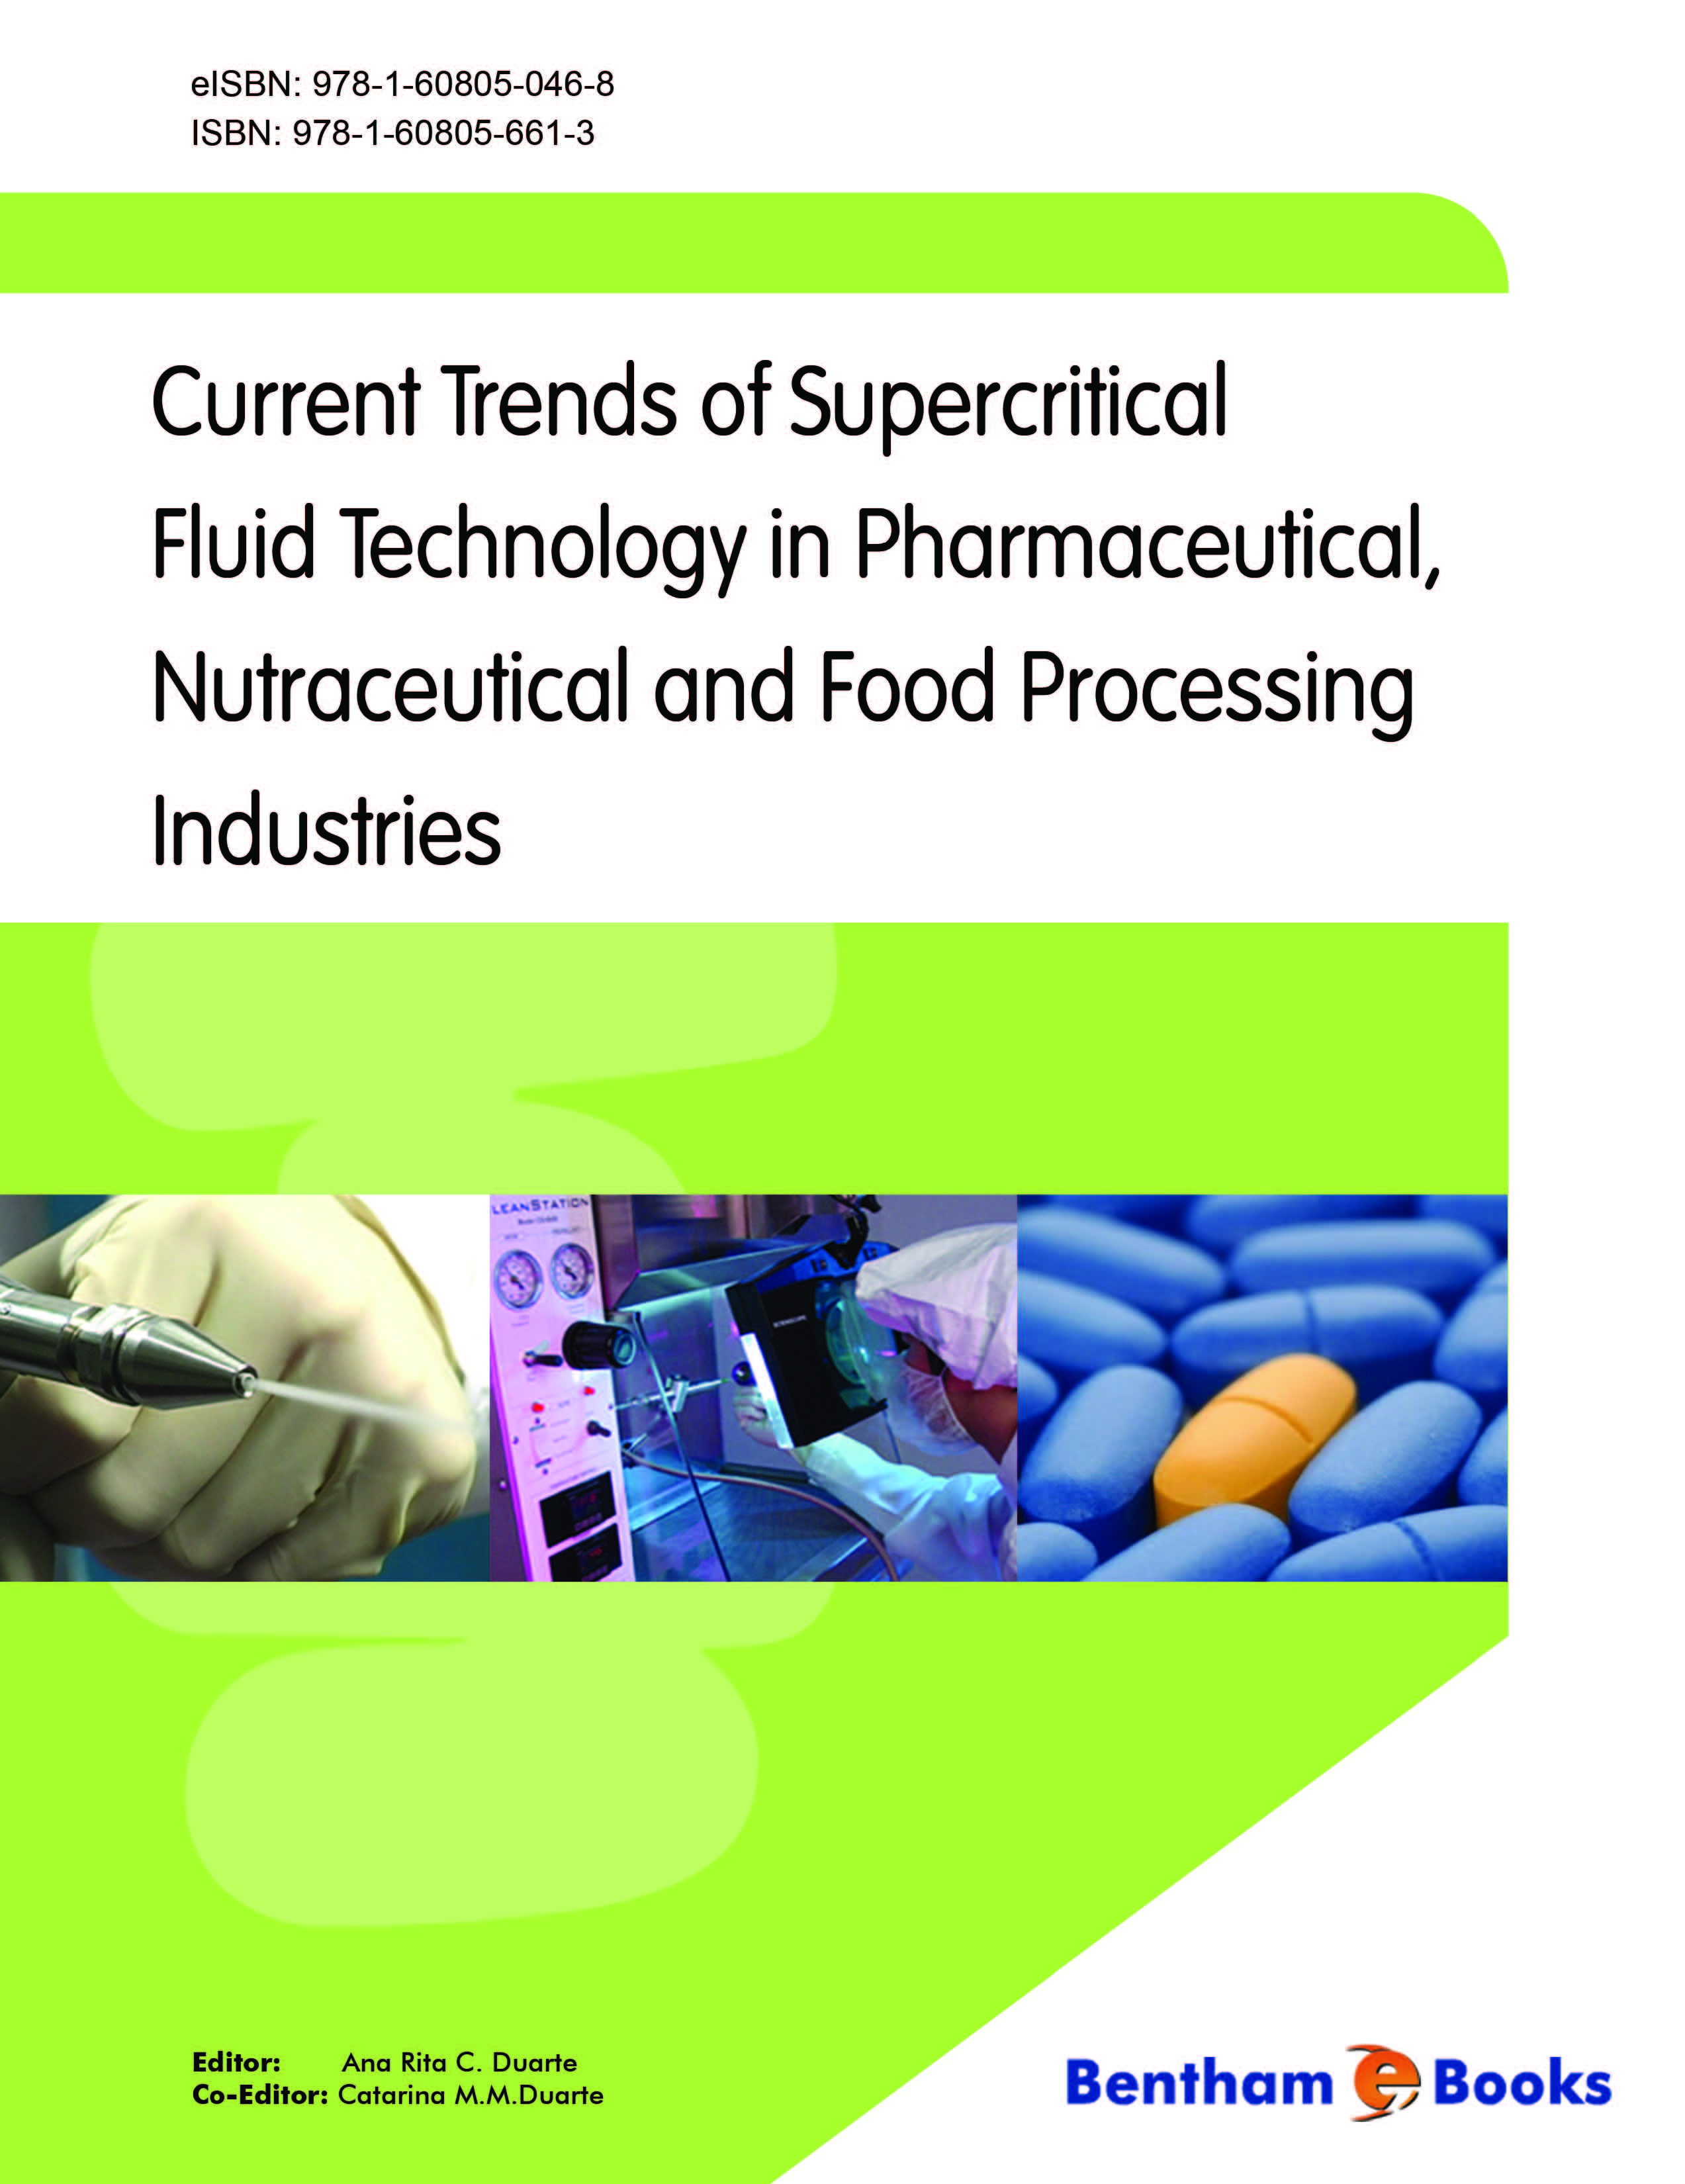 Current Trends of the Supercritical Fluid Technology in the Pharmaceutical, Nutraceutical and Food Processing Industries